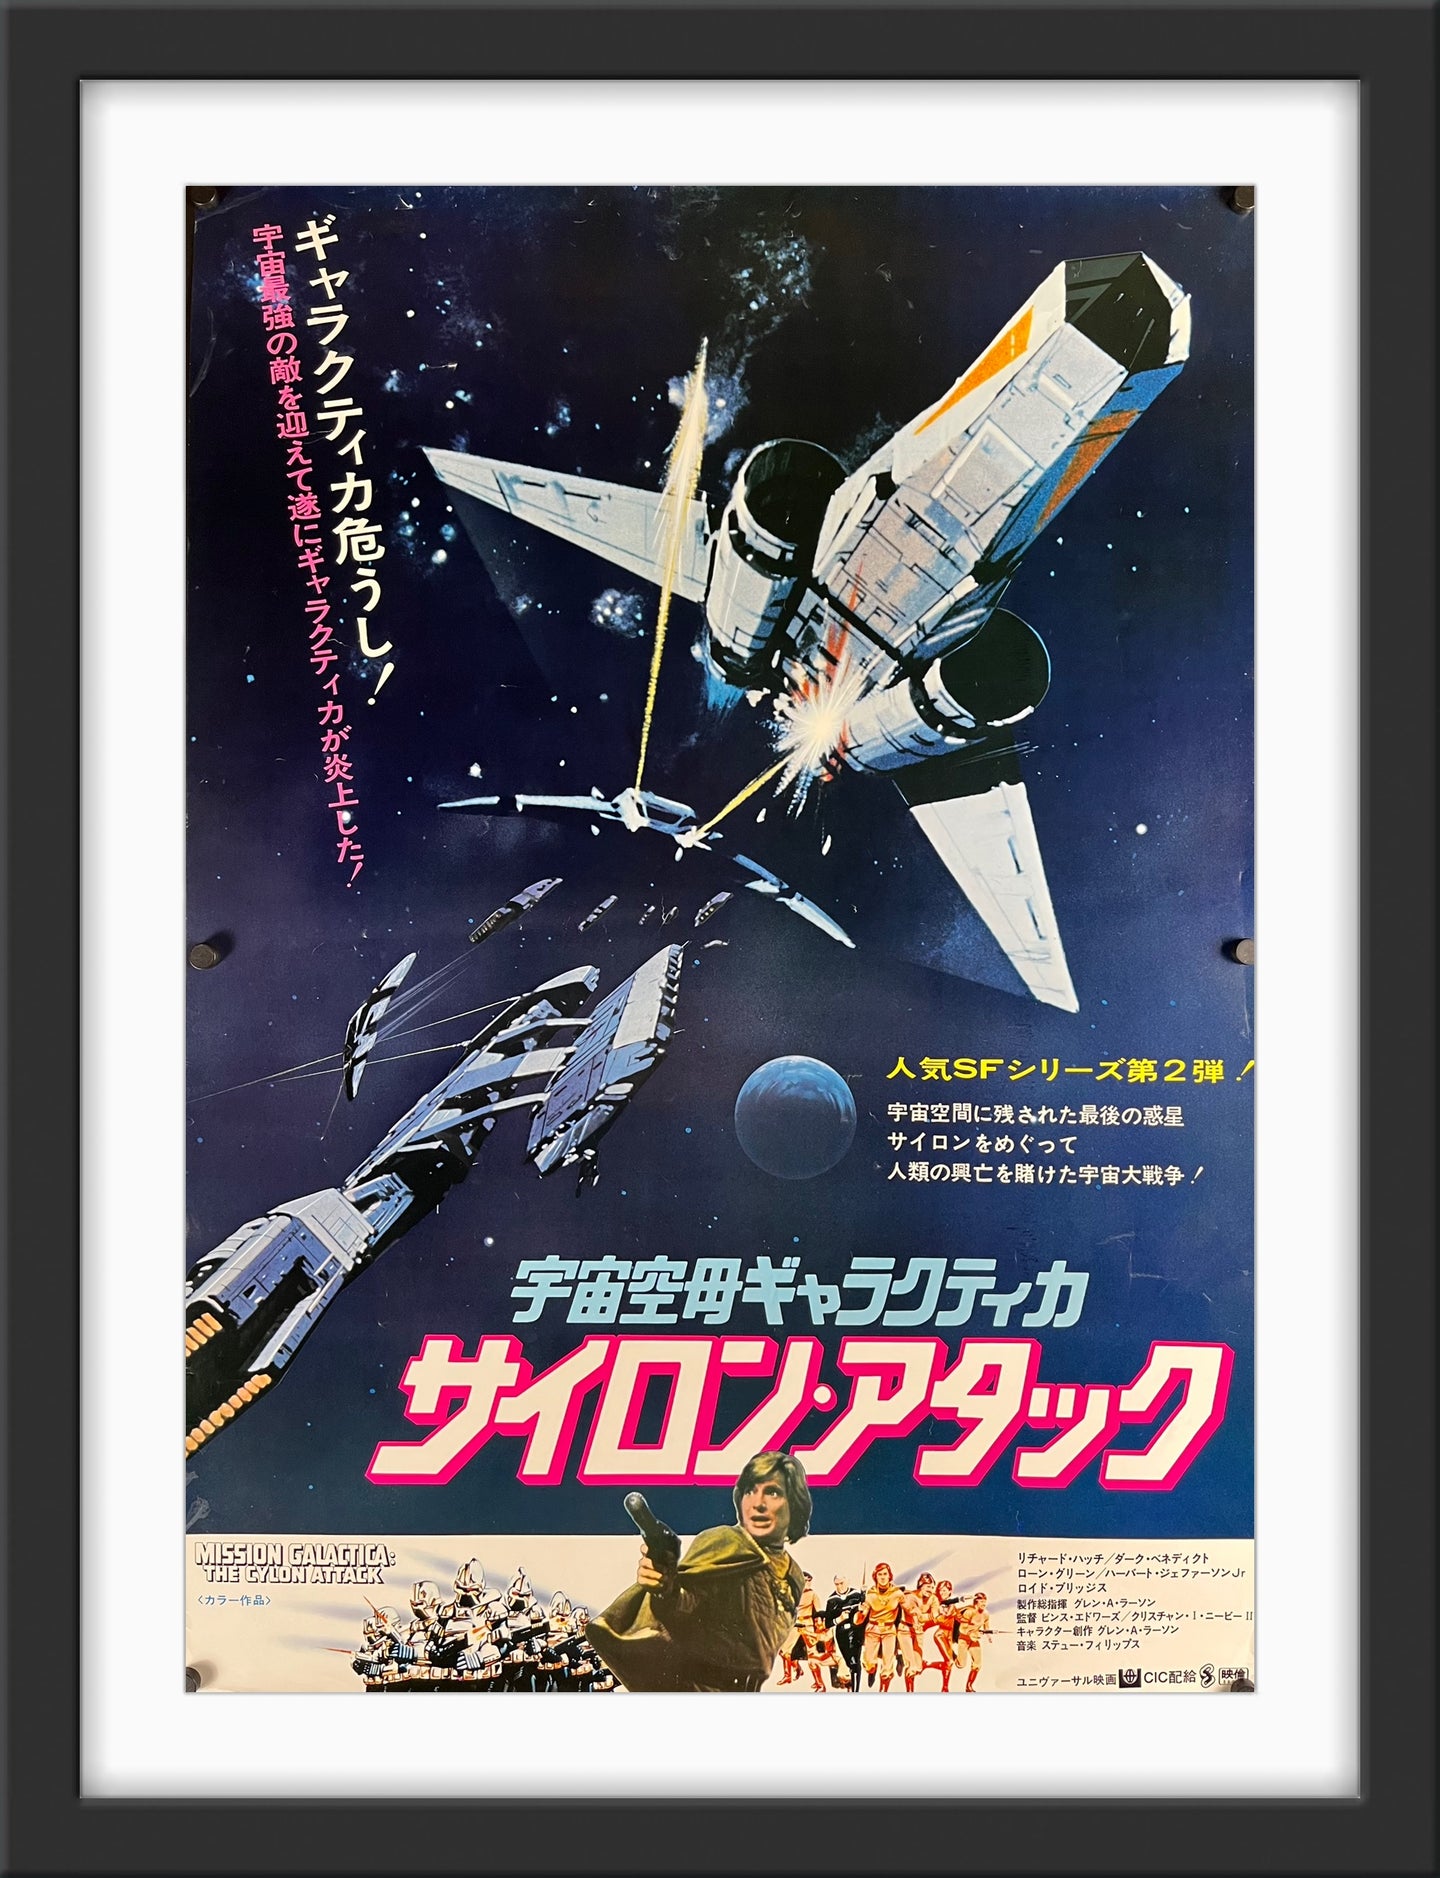 An original Japanese movie poster for the film Battlestar Galactica: The Cylon Attack